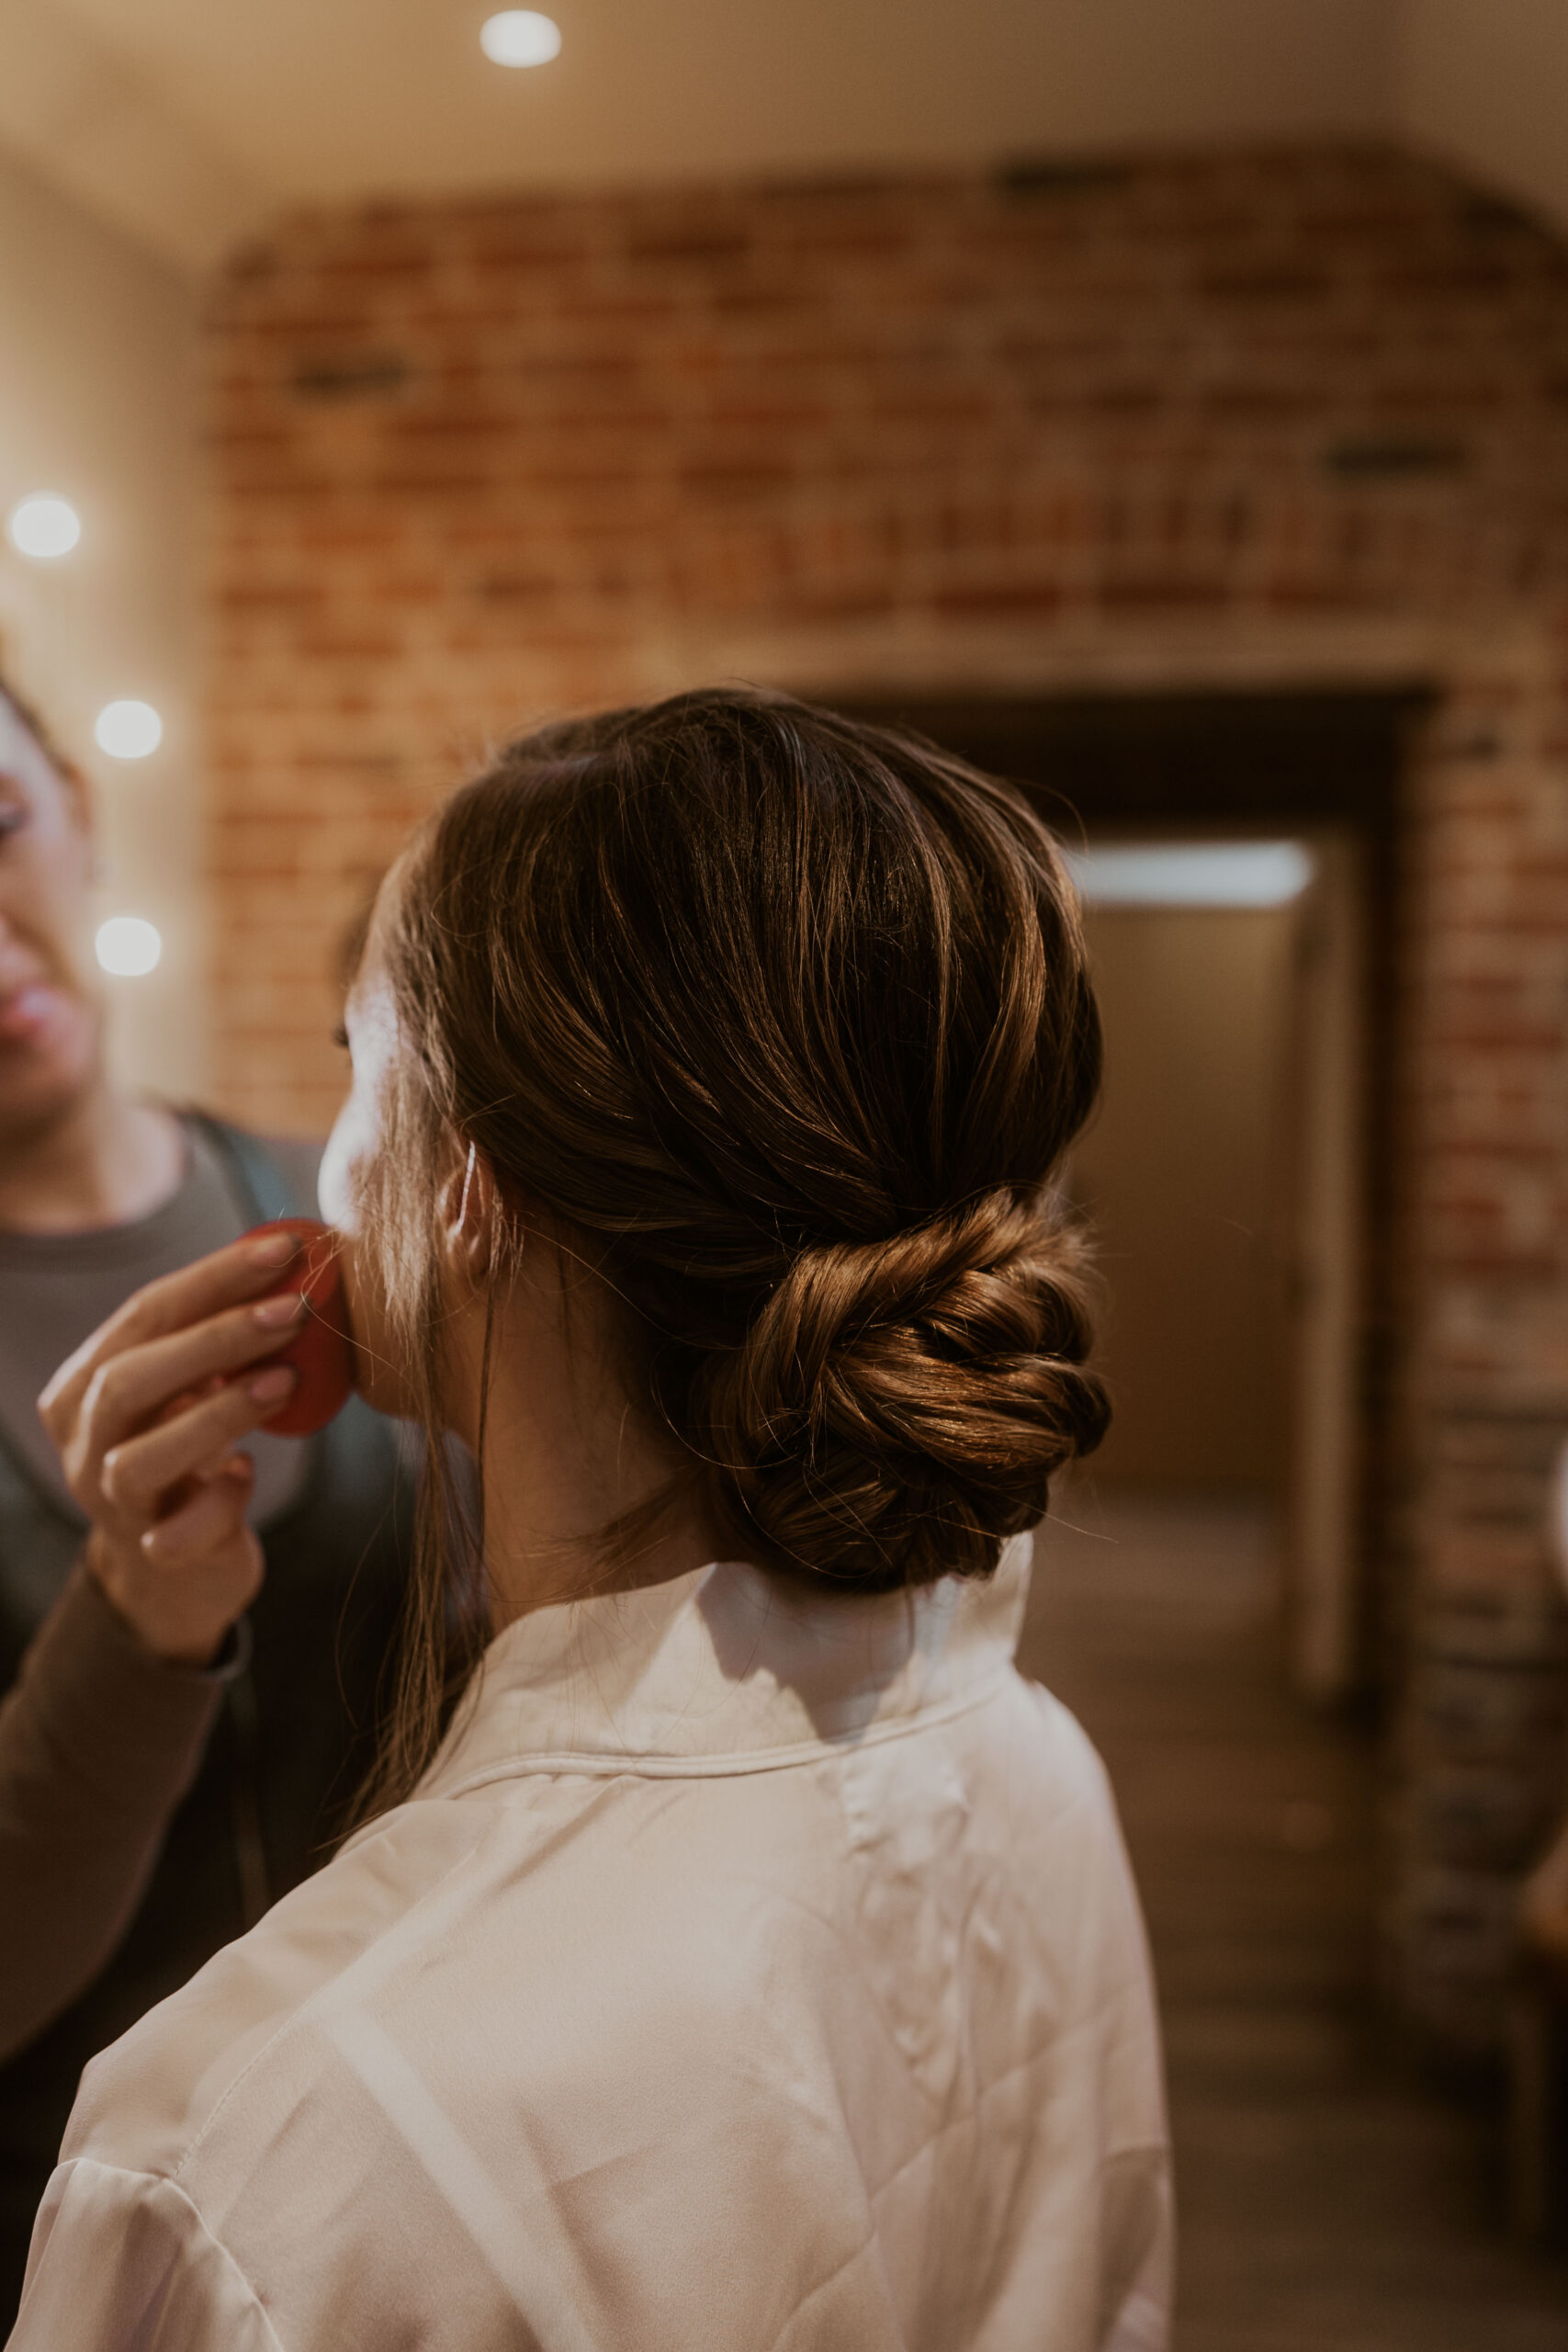 Relaxed wedding photographer capturing Brides wedding morning getting ready at Foxtail Barns 